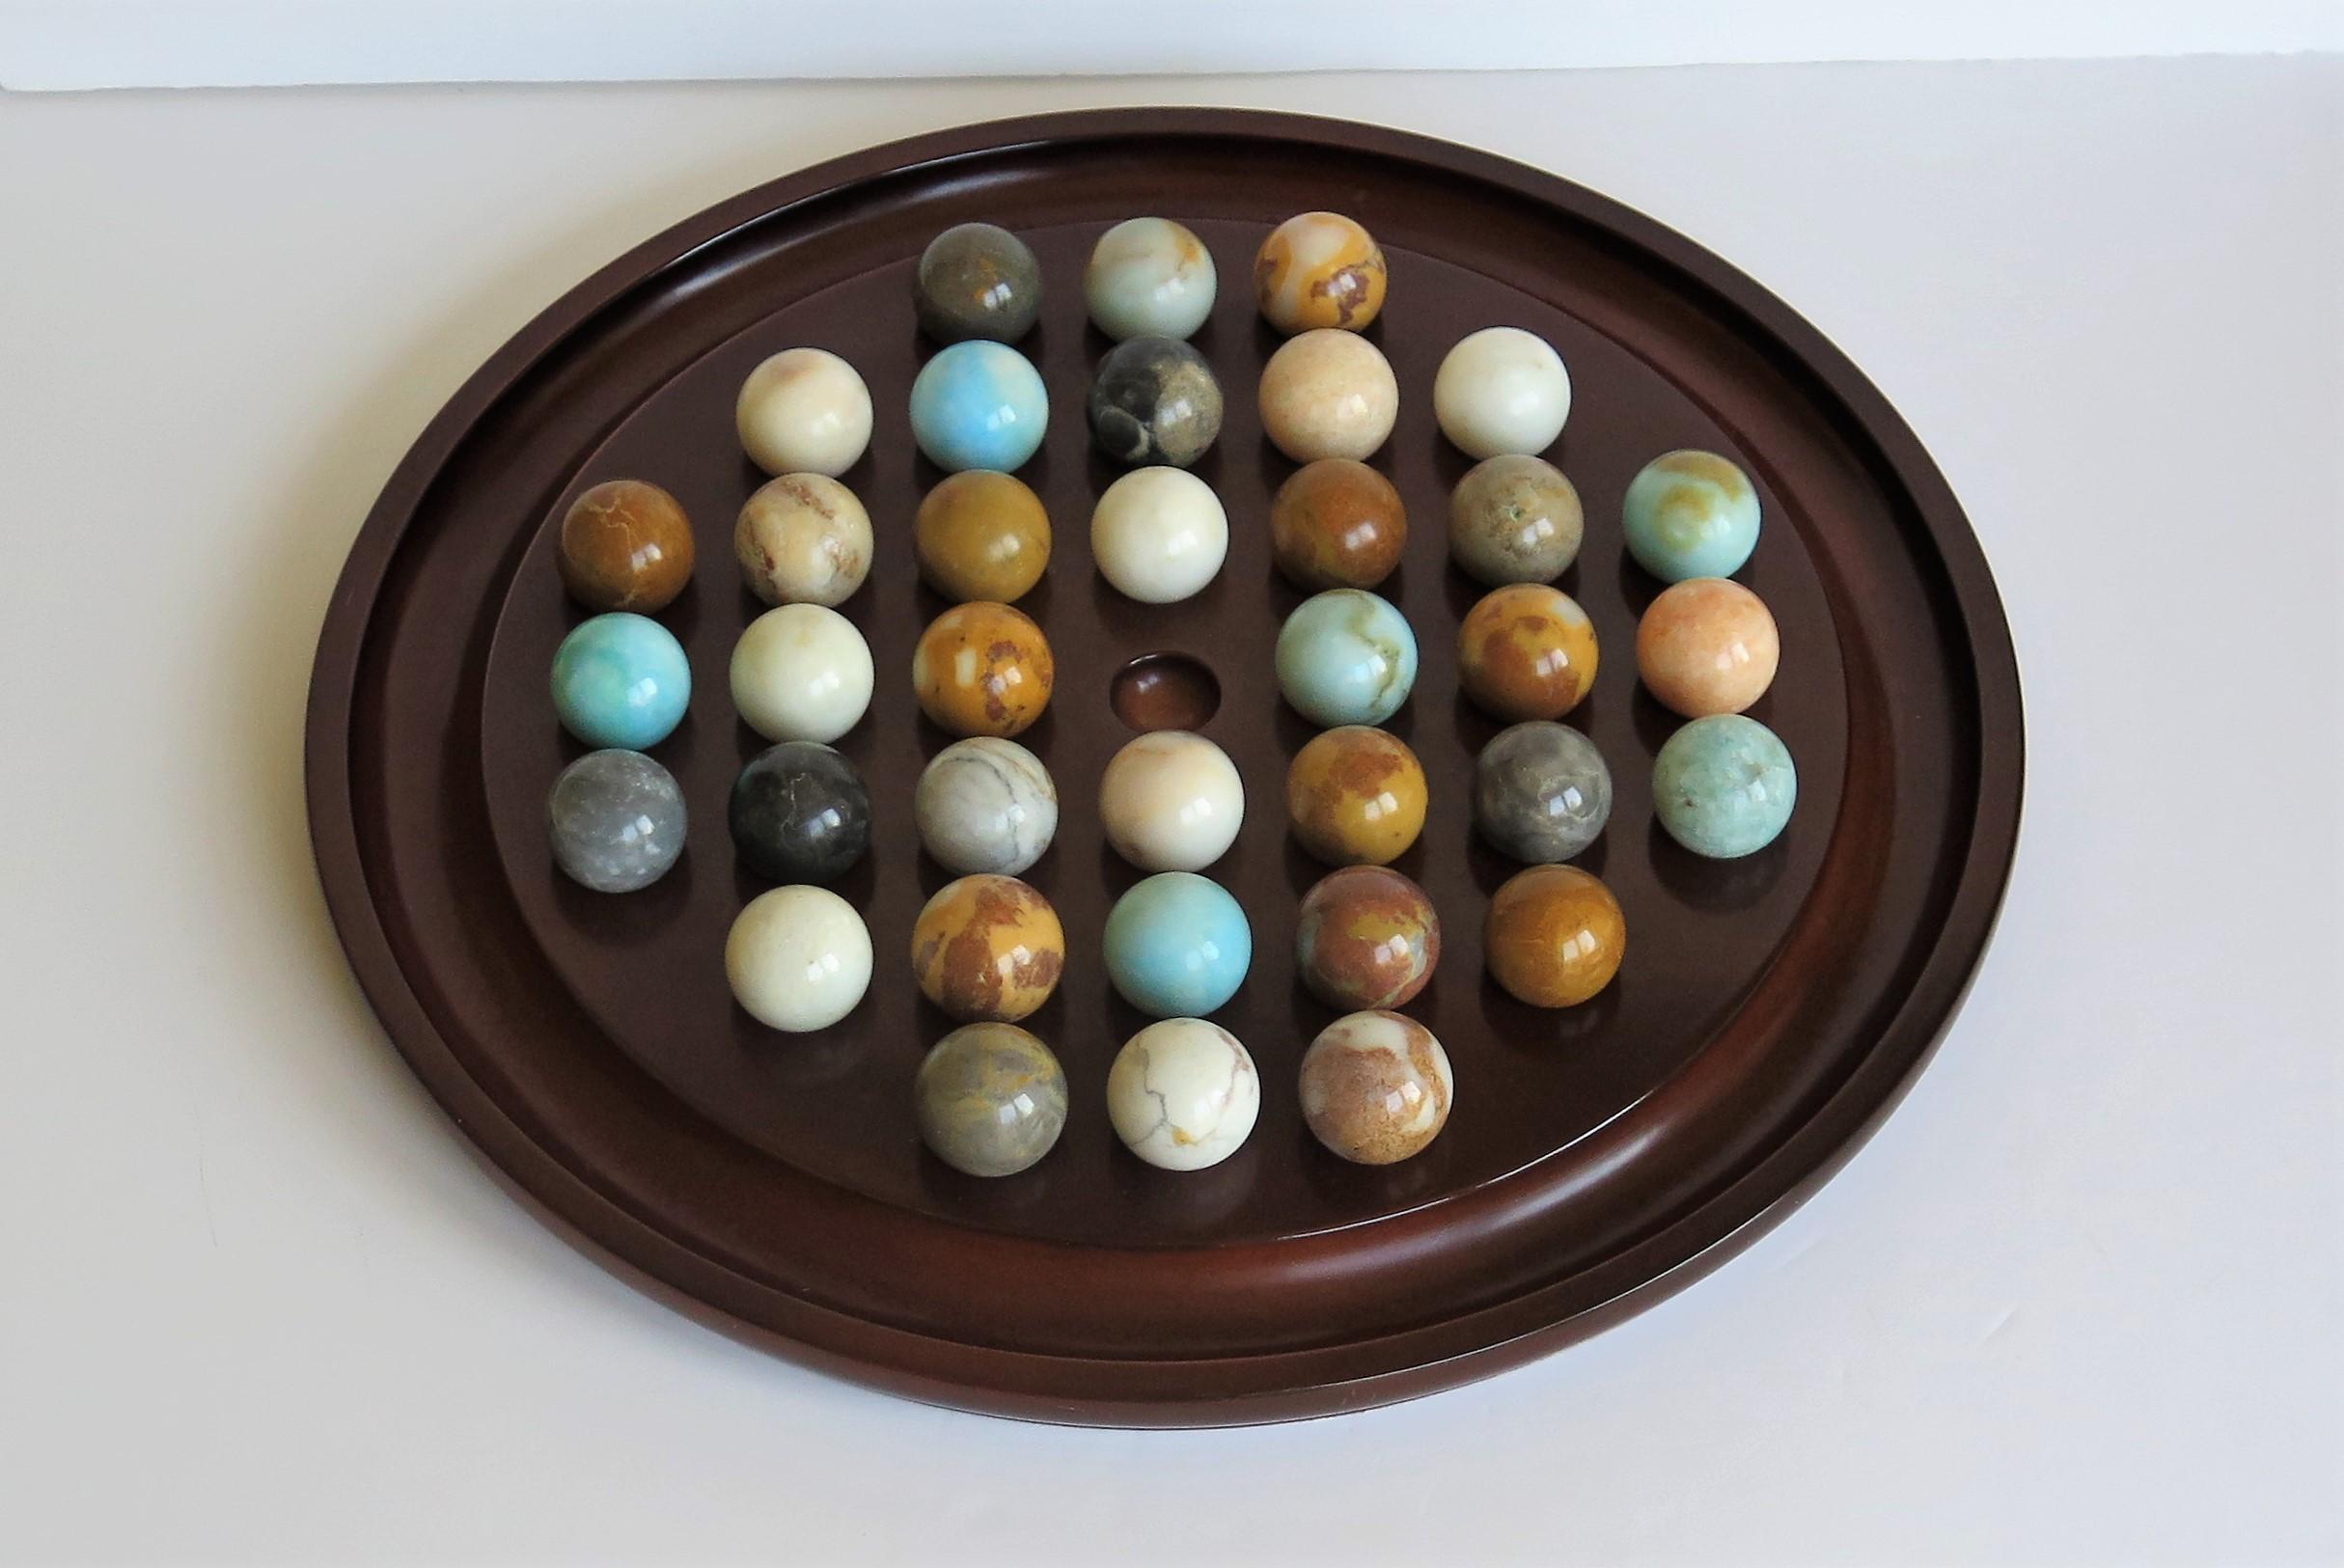 This is a very decorative and complete board game of 37 hole marble solitaire with a very large 13.5 inch diameter board and 36 beautiful individual large agate or mineral stone marbles, which we date to the mid-20th century, probably of French